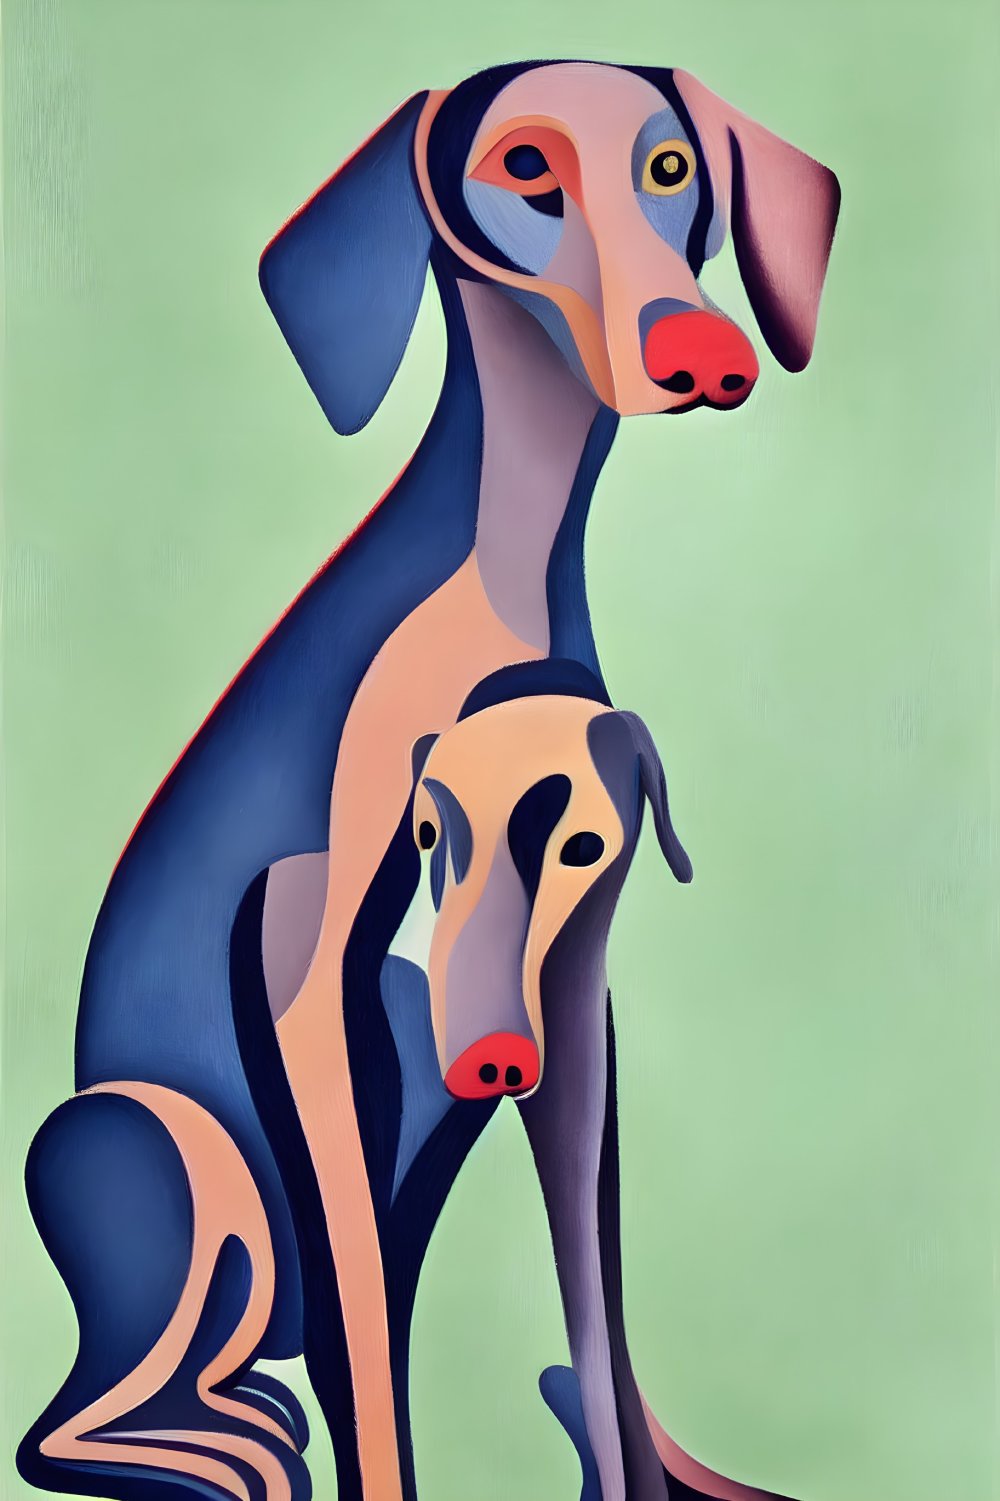 Abstract Art: Two Dogs in Exaggerated Style on Green Background